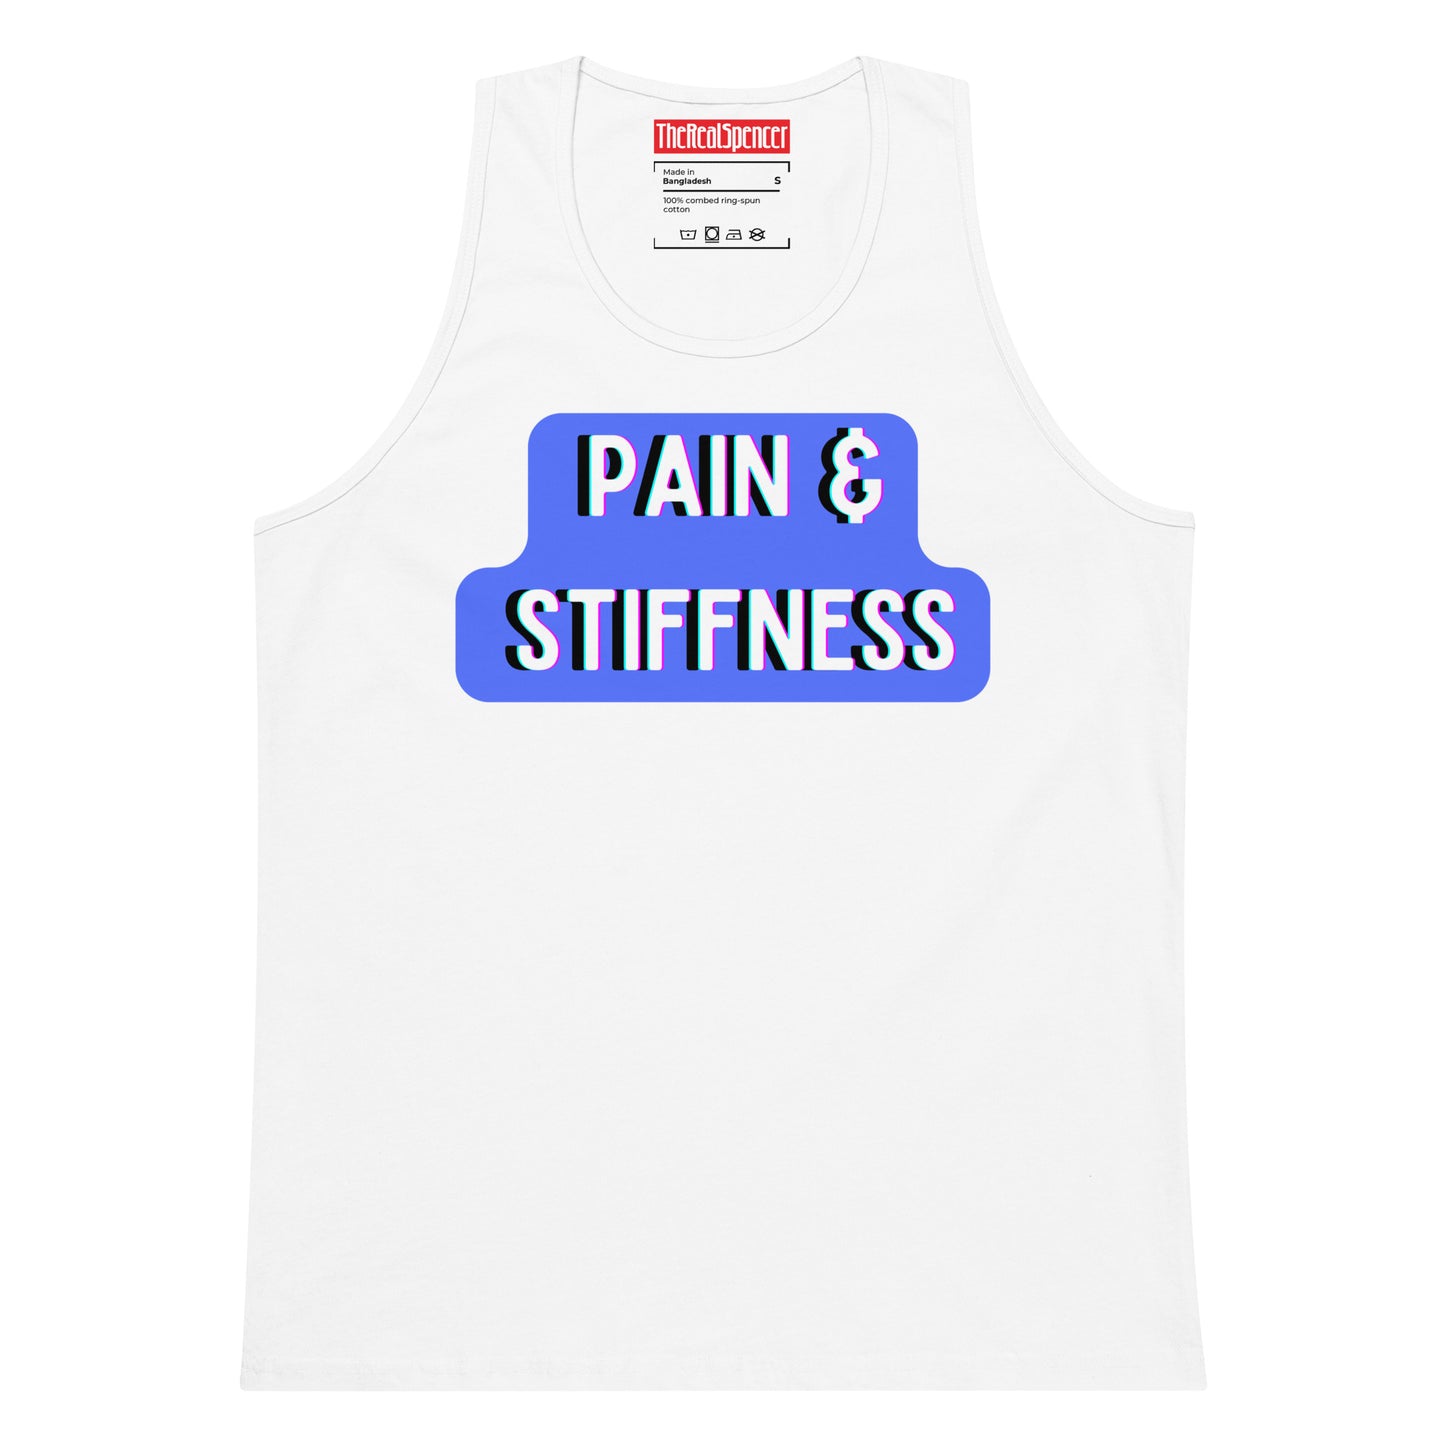 Pain and Stiffness Tank Top